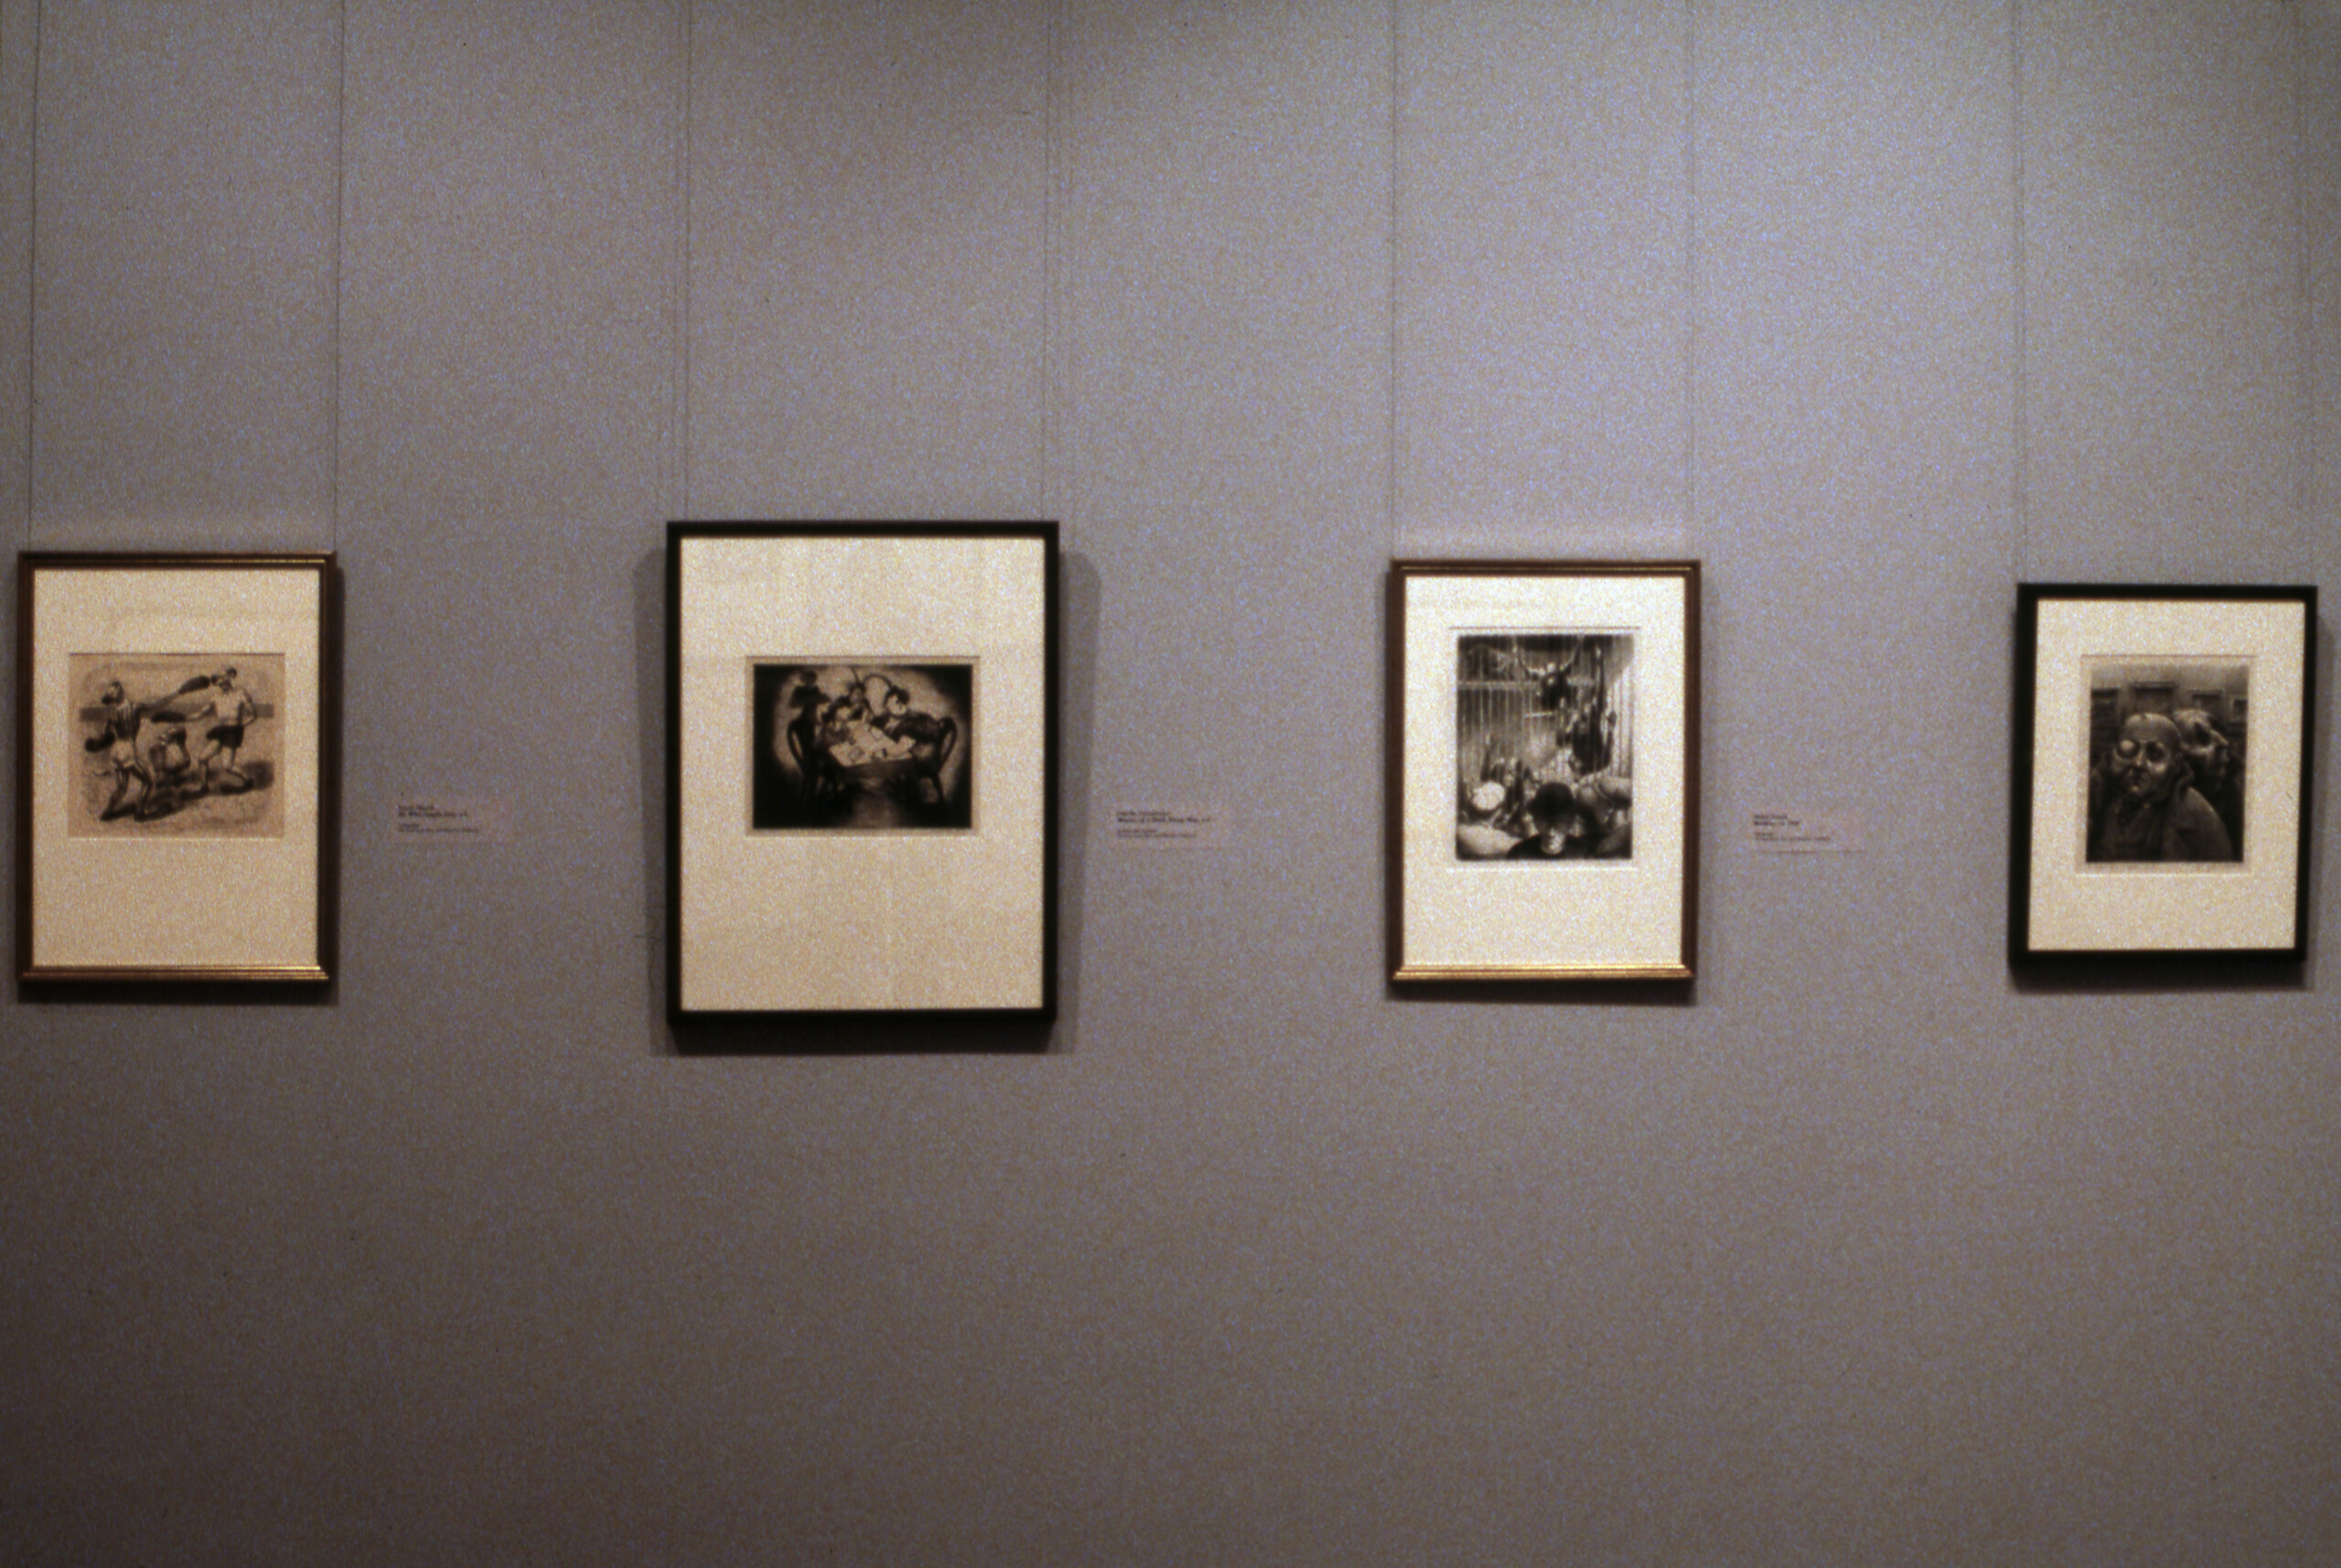 A view of a gallery space. The walls are painted gray, and several artworks are hanging on them. The artworks are black-and-white photographs.